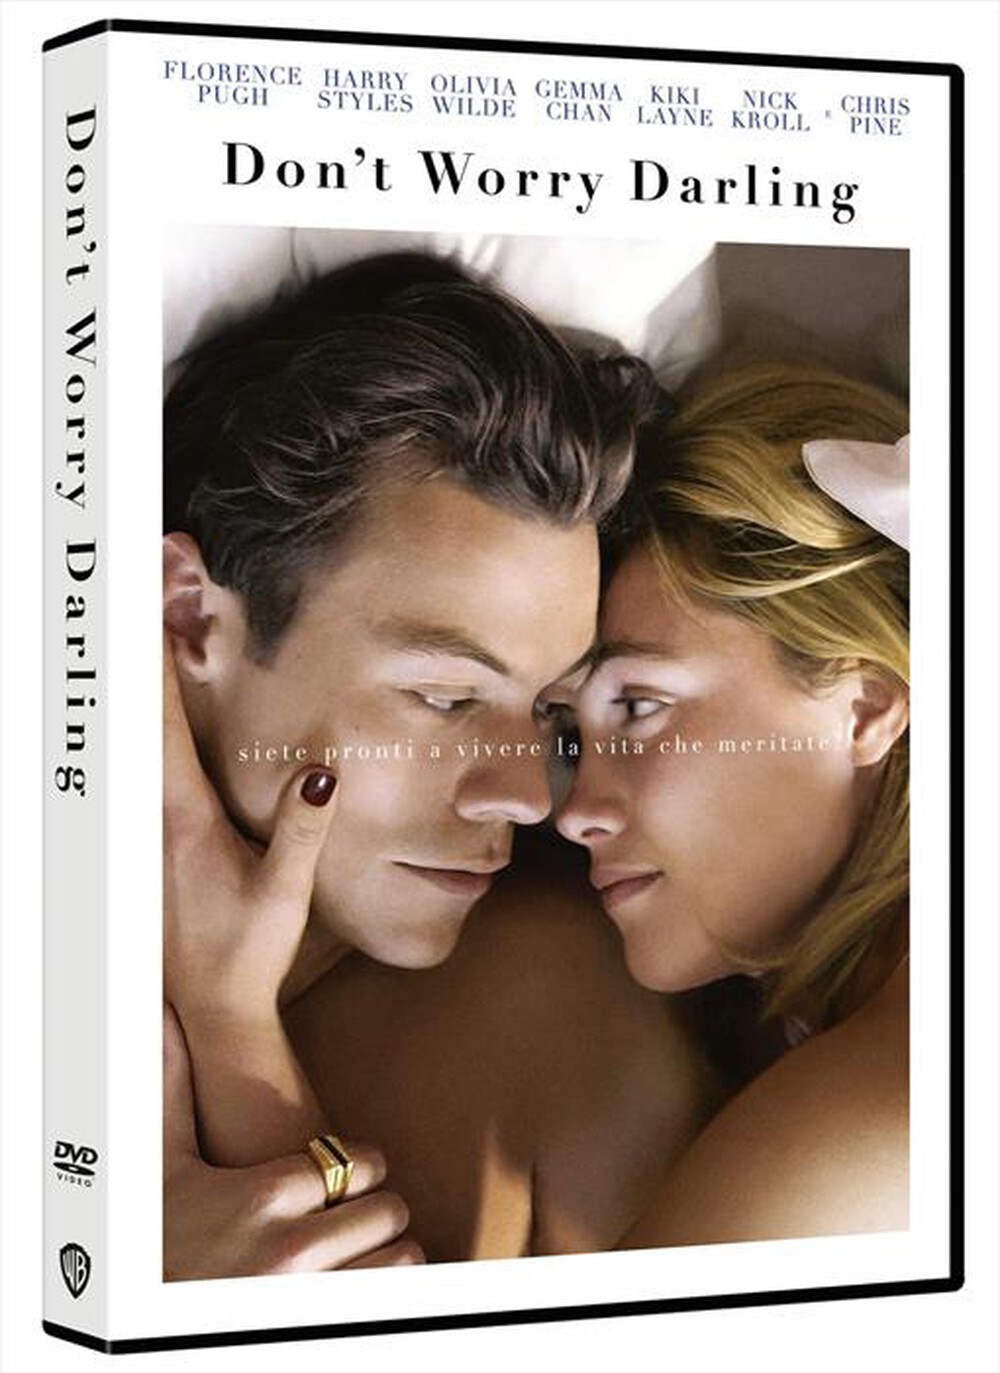 "WARNER HOME VIDEO - Don'T Worry Darling"